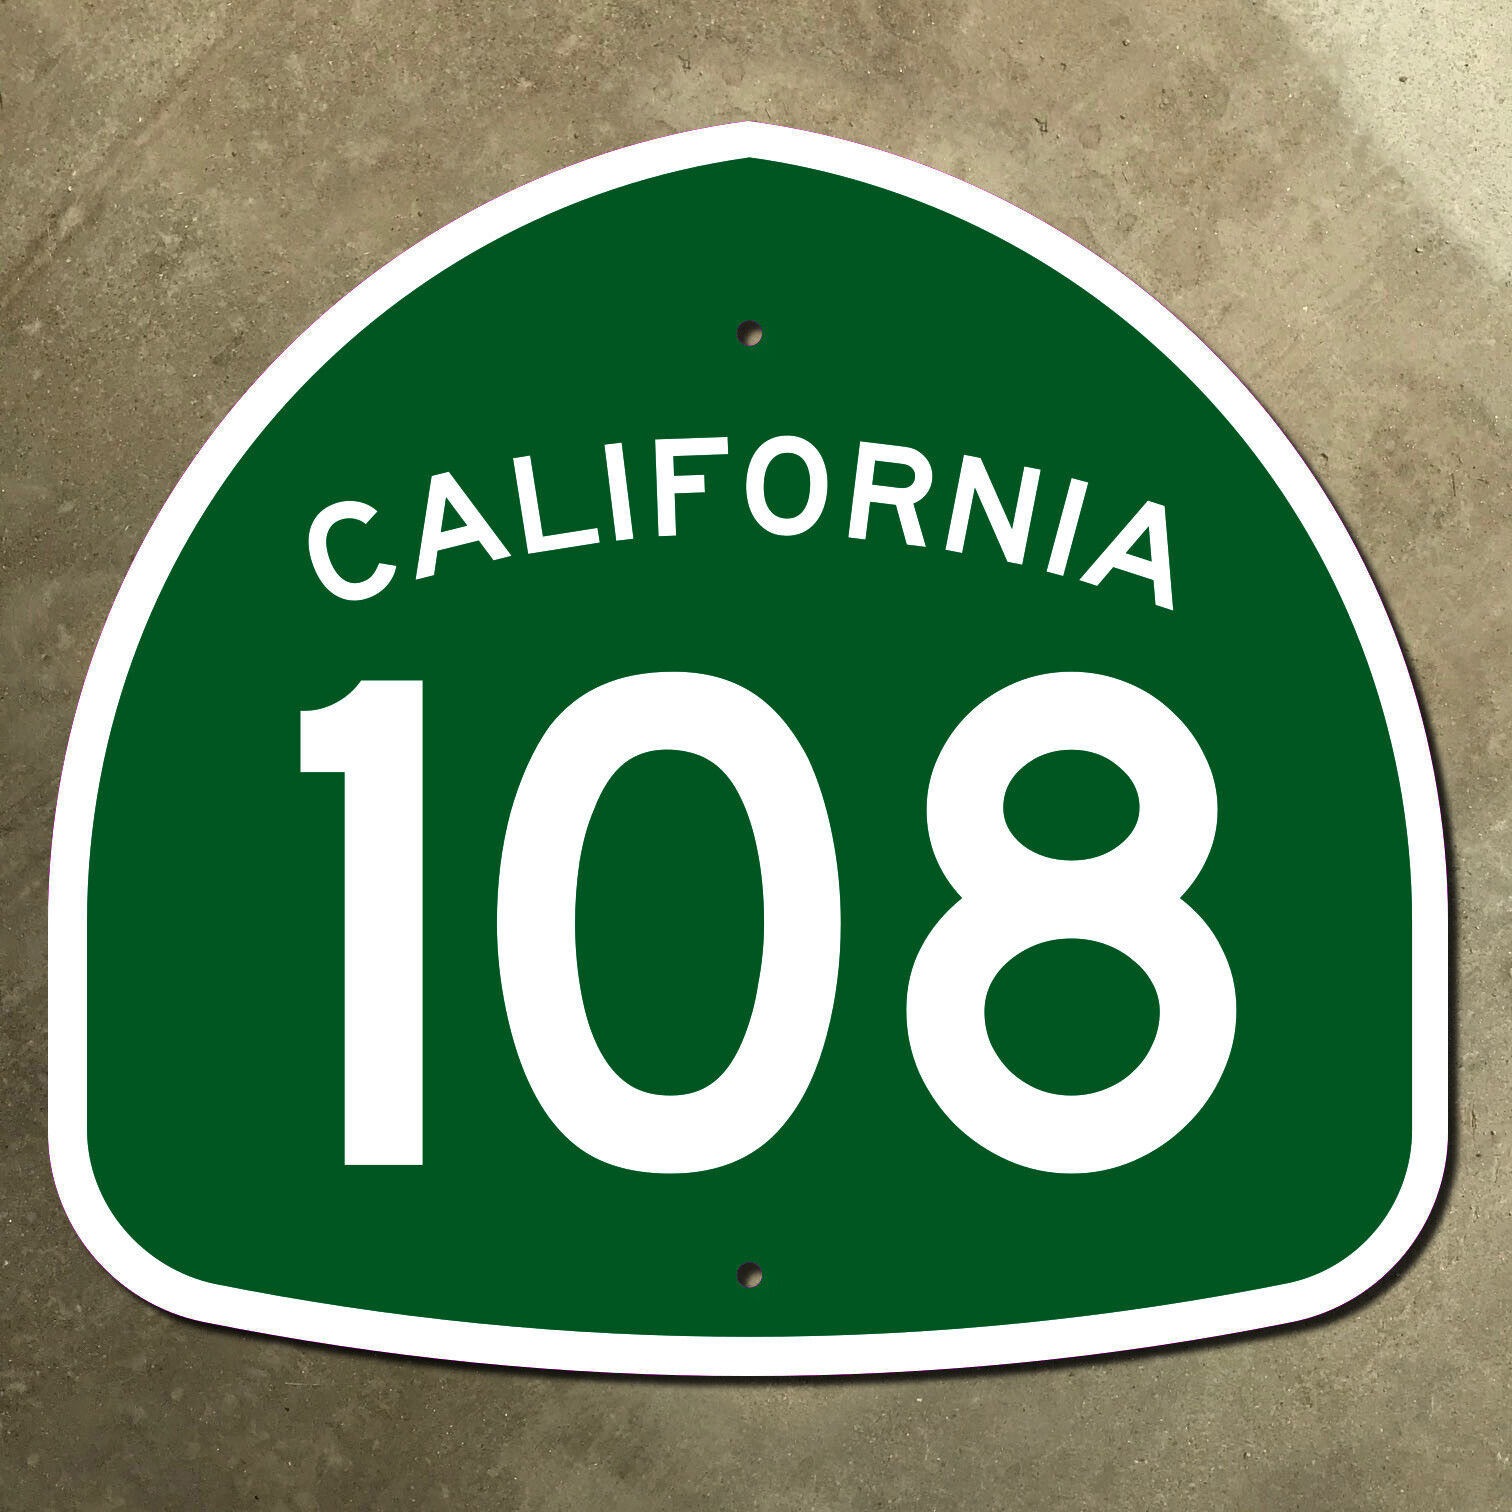 California State Route 108 Modesto Sonora Pass Sierra highway road sign 20x18